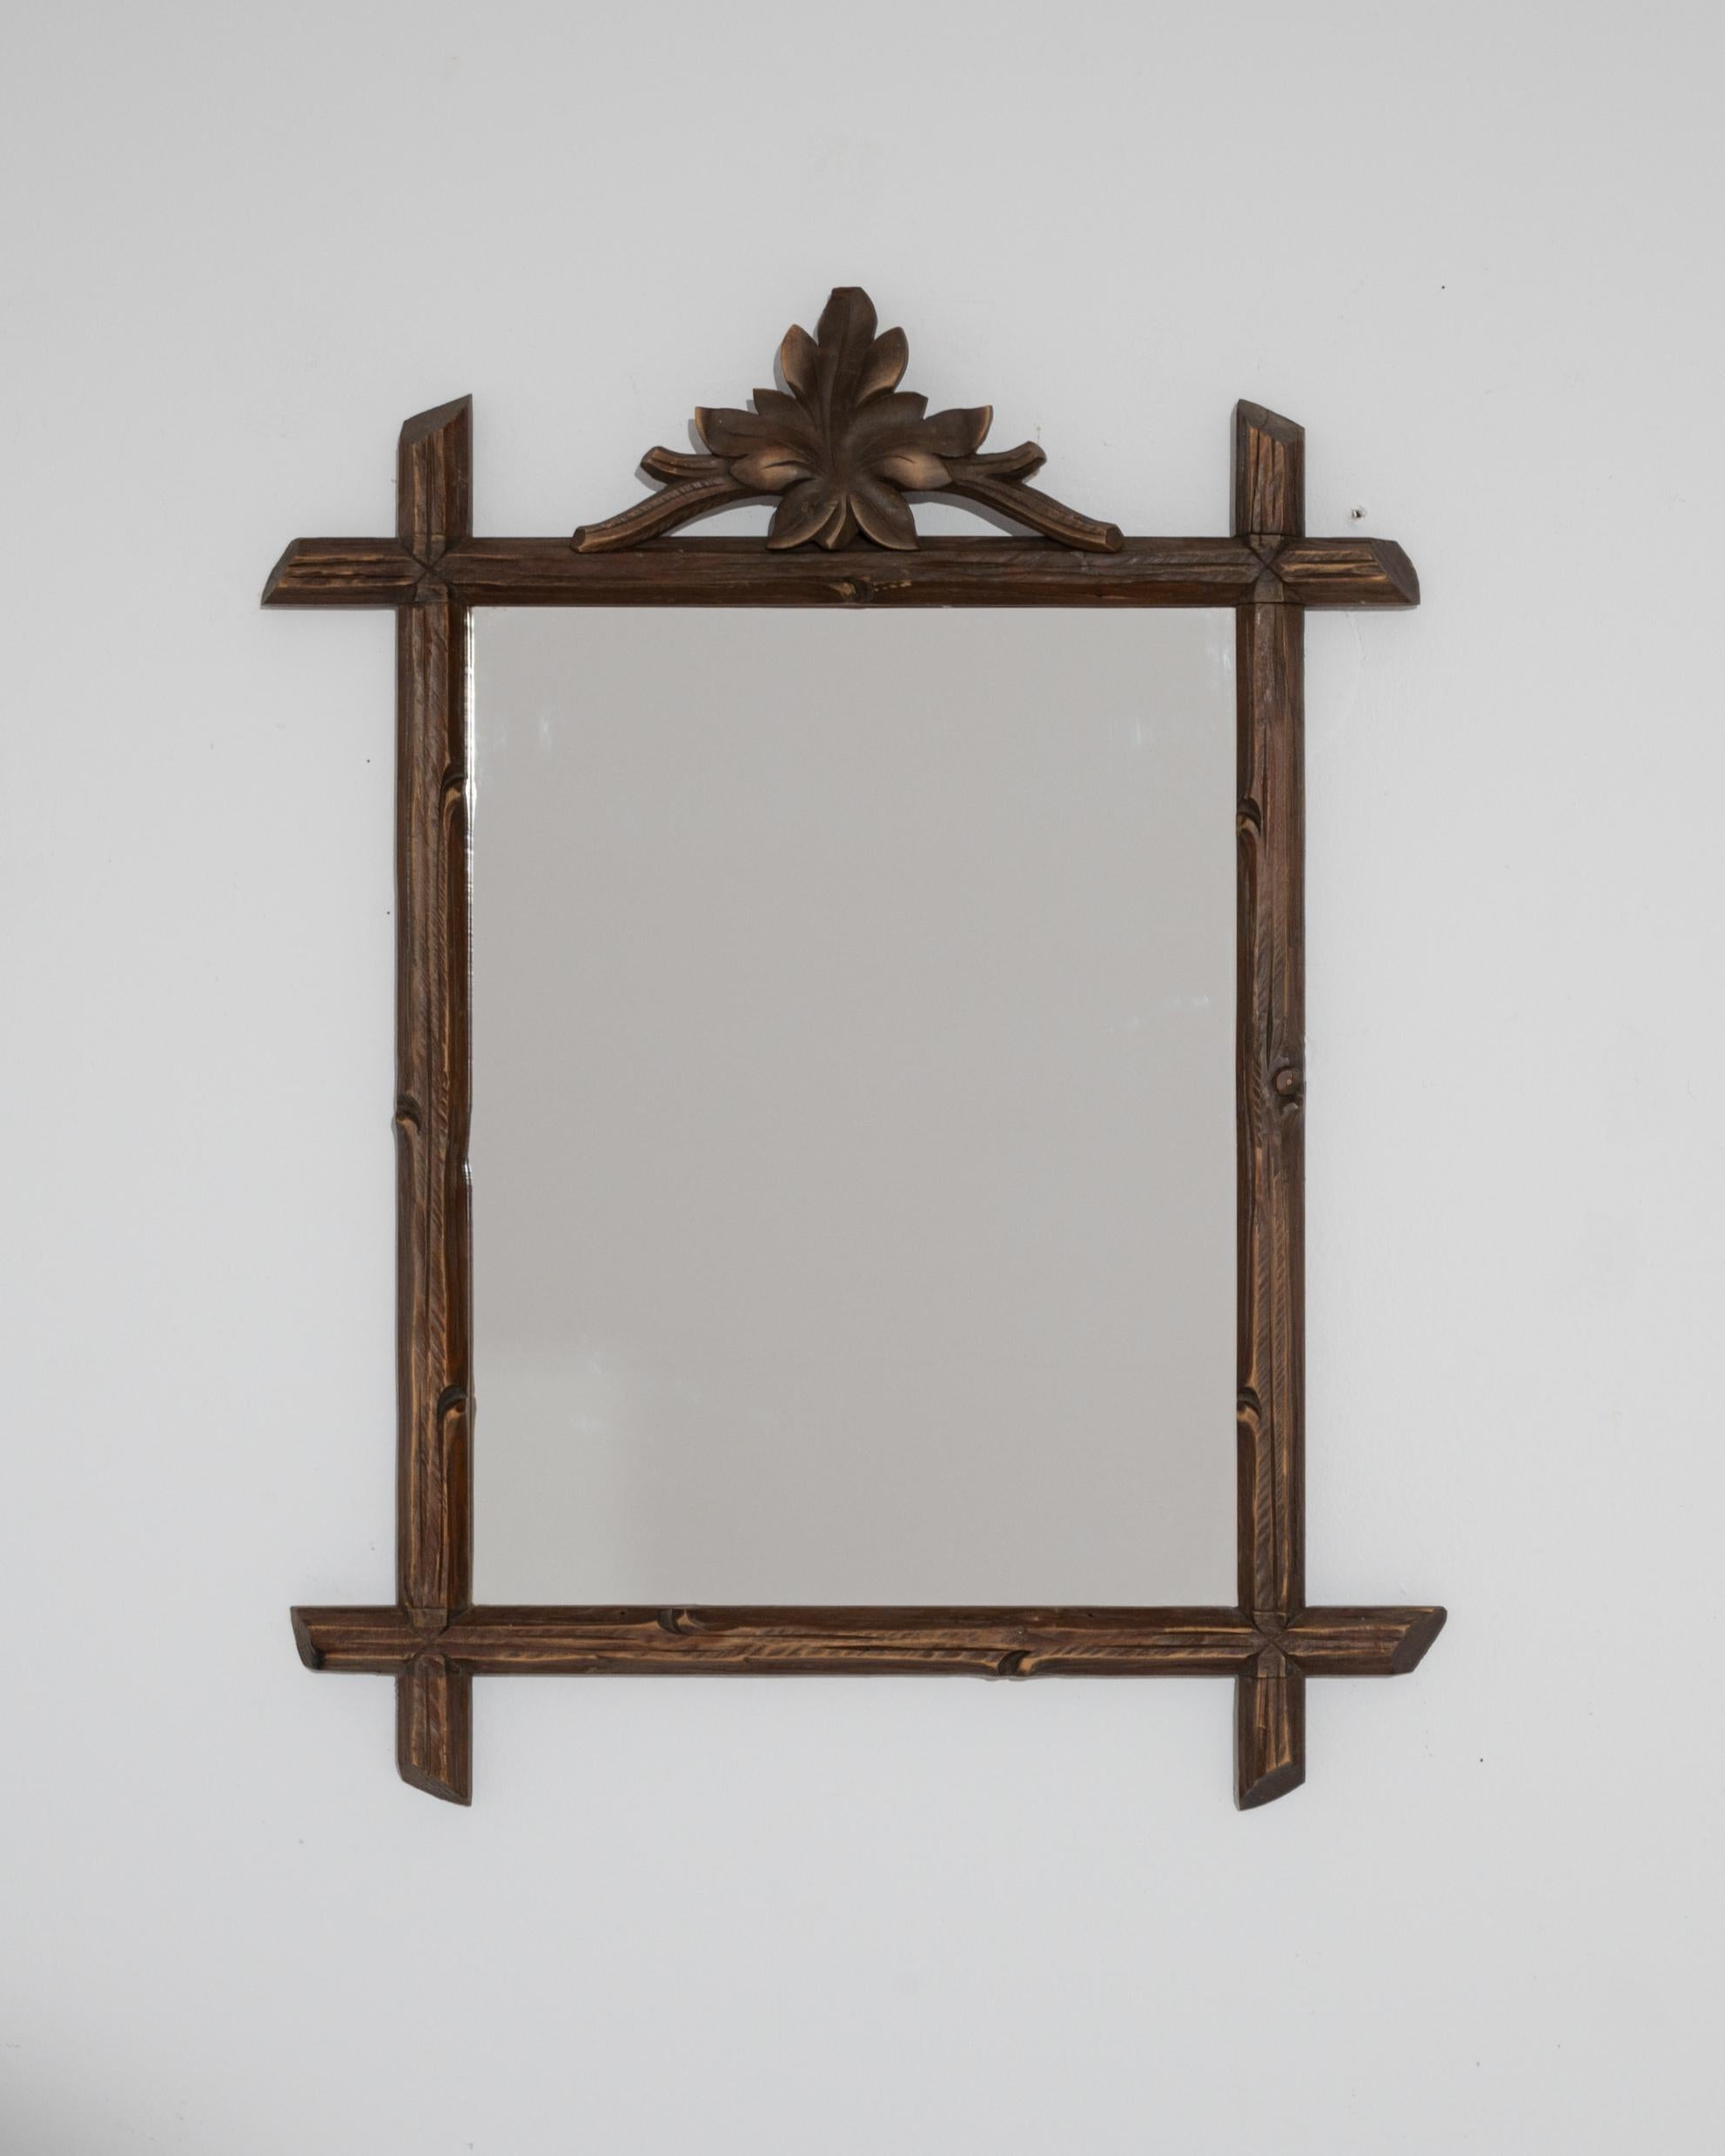 The eye-catching design of this vintage wooden mirror conjures the fresh
 air of alpine abundance. Crafted in Austria at the turn of the century, the wooden frame creates a masterful illusion of rustic simplicity — carved to resemble an arrangement